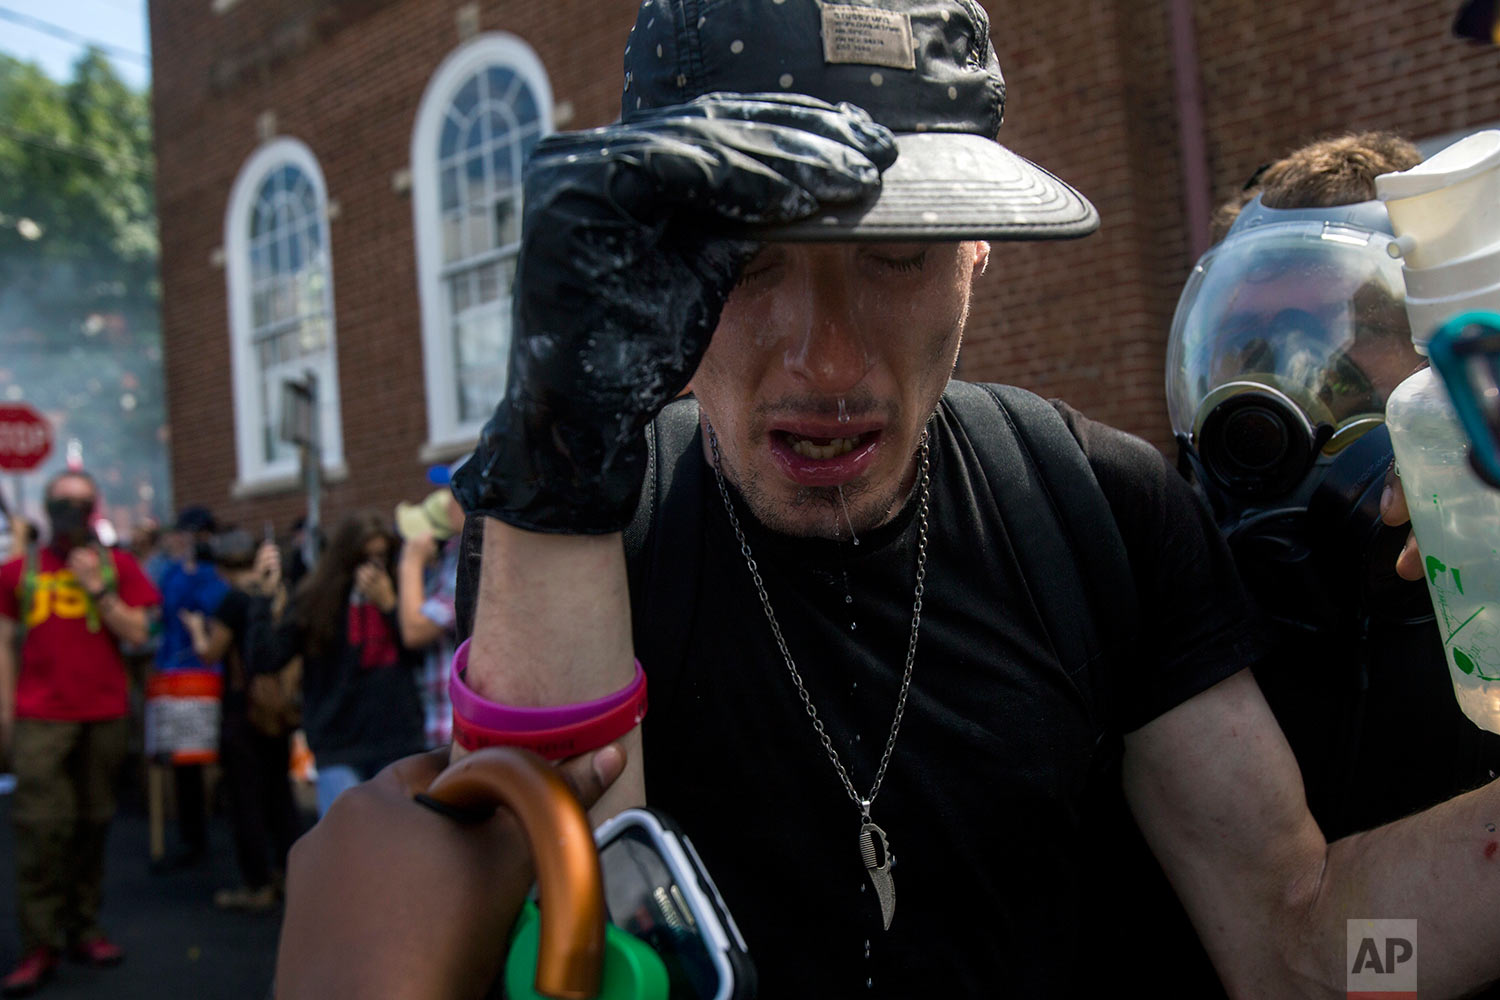  A counter-protester reacts after getting an eye wash after being sprayed with a substance during a white nationalist rally on Saturday Aug. 12, 2017, in Charlottesville, Va. (Shaban Athuman /Richmond Times-Dispatch via AP) 